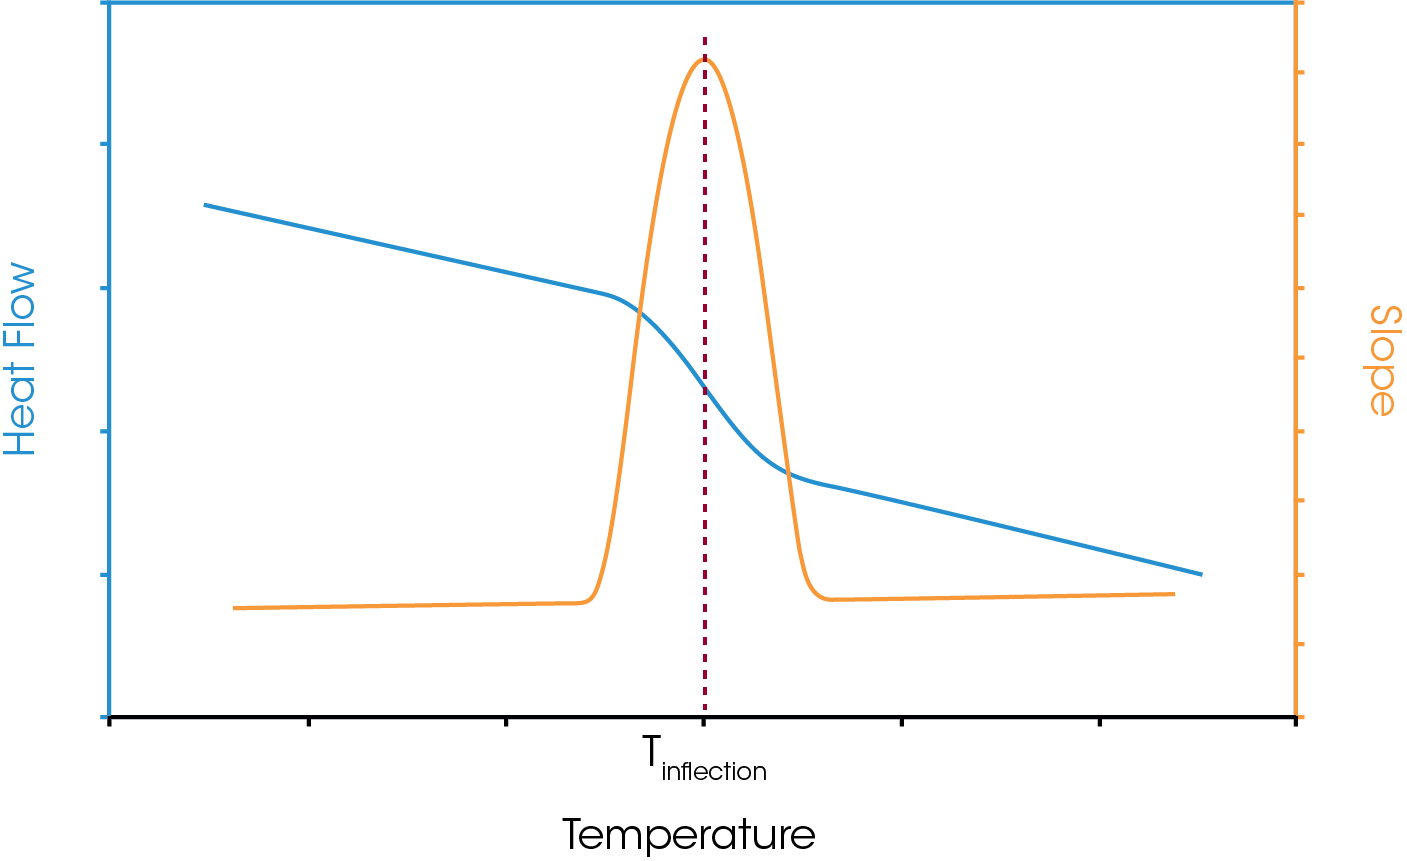 Figure 4. Glass transition analysis using the inflection point.